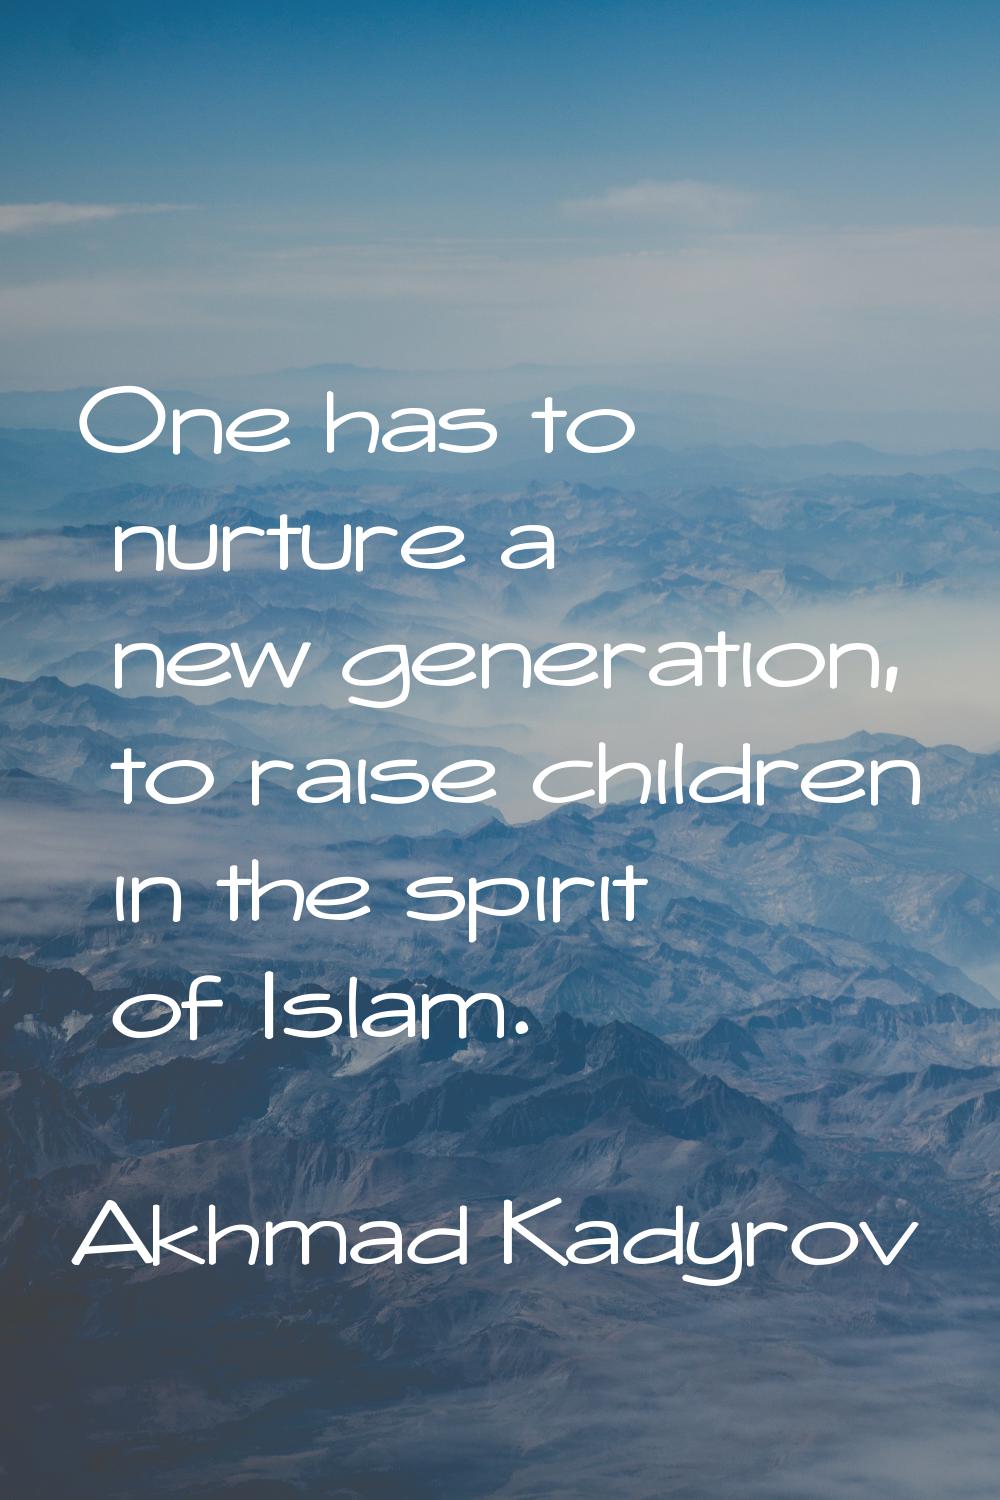 One has to nurture a new generation, to raise children in the spirit of Islam.